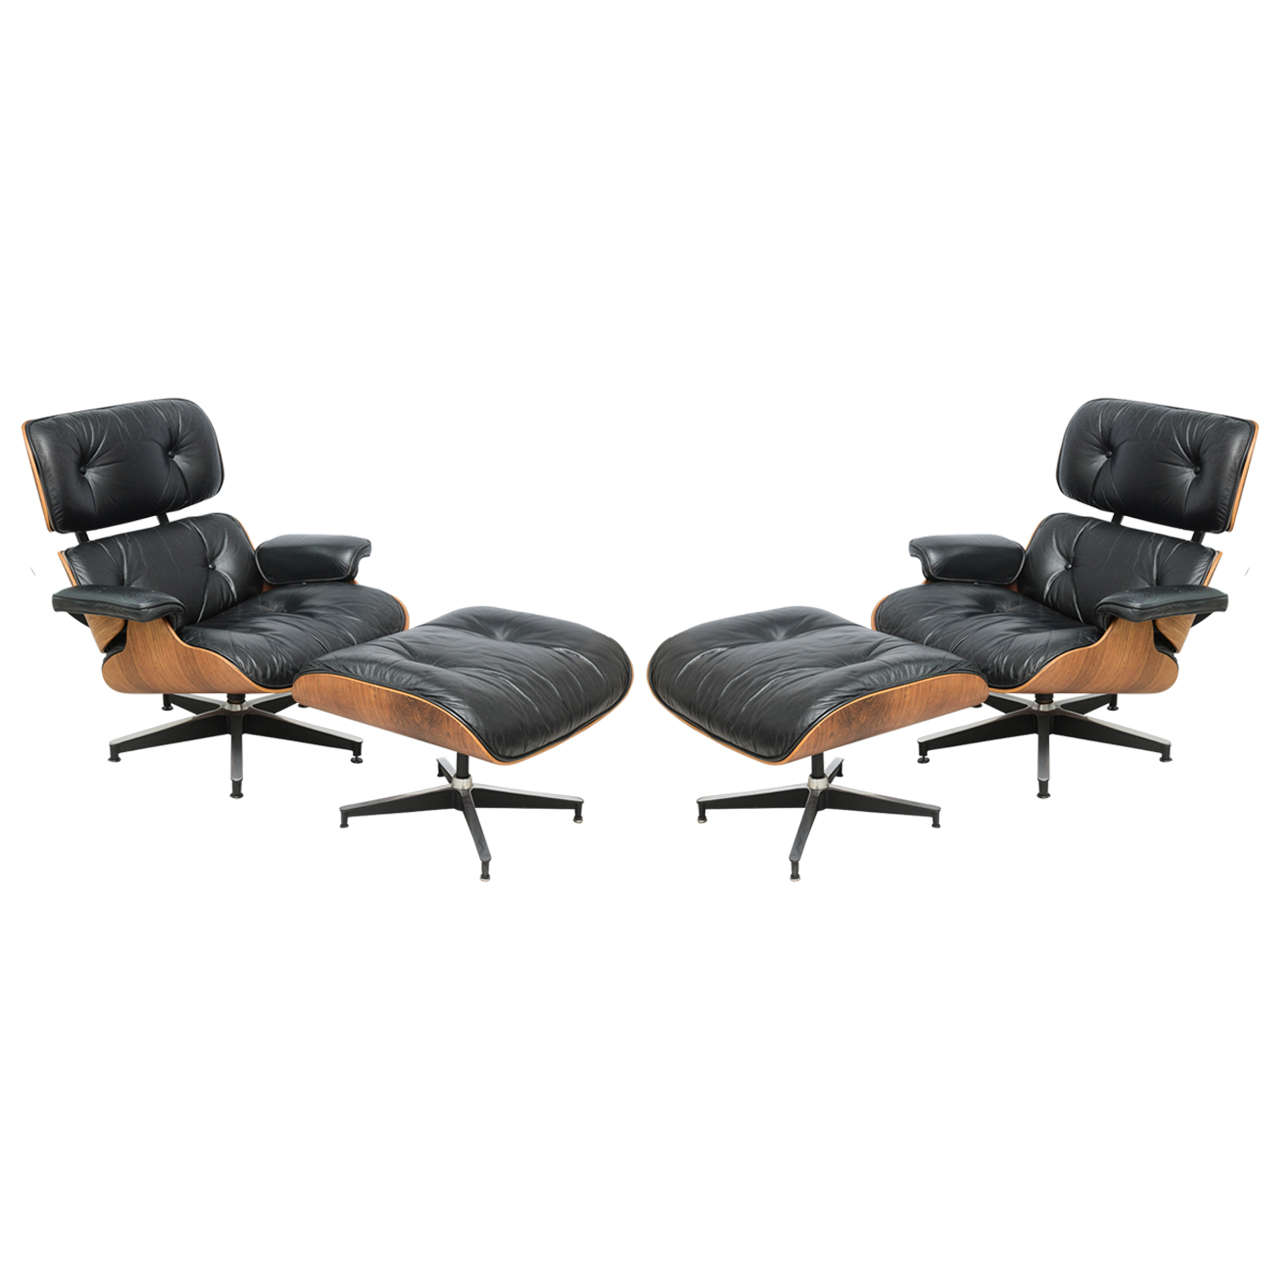 Two Vintage Eames Rosewood and Black Leather Lounge Chairs